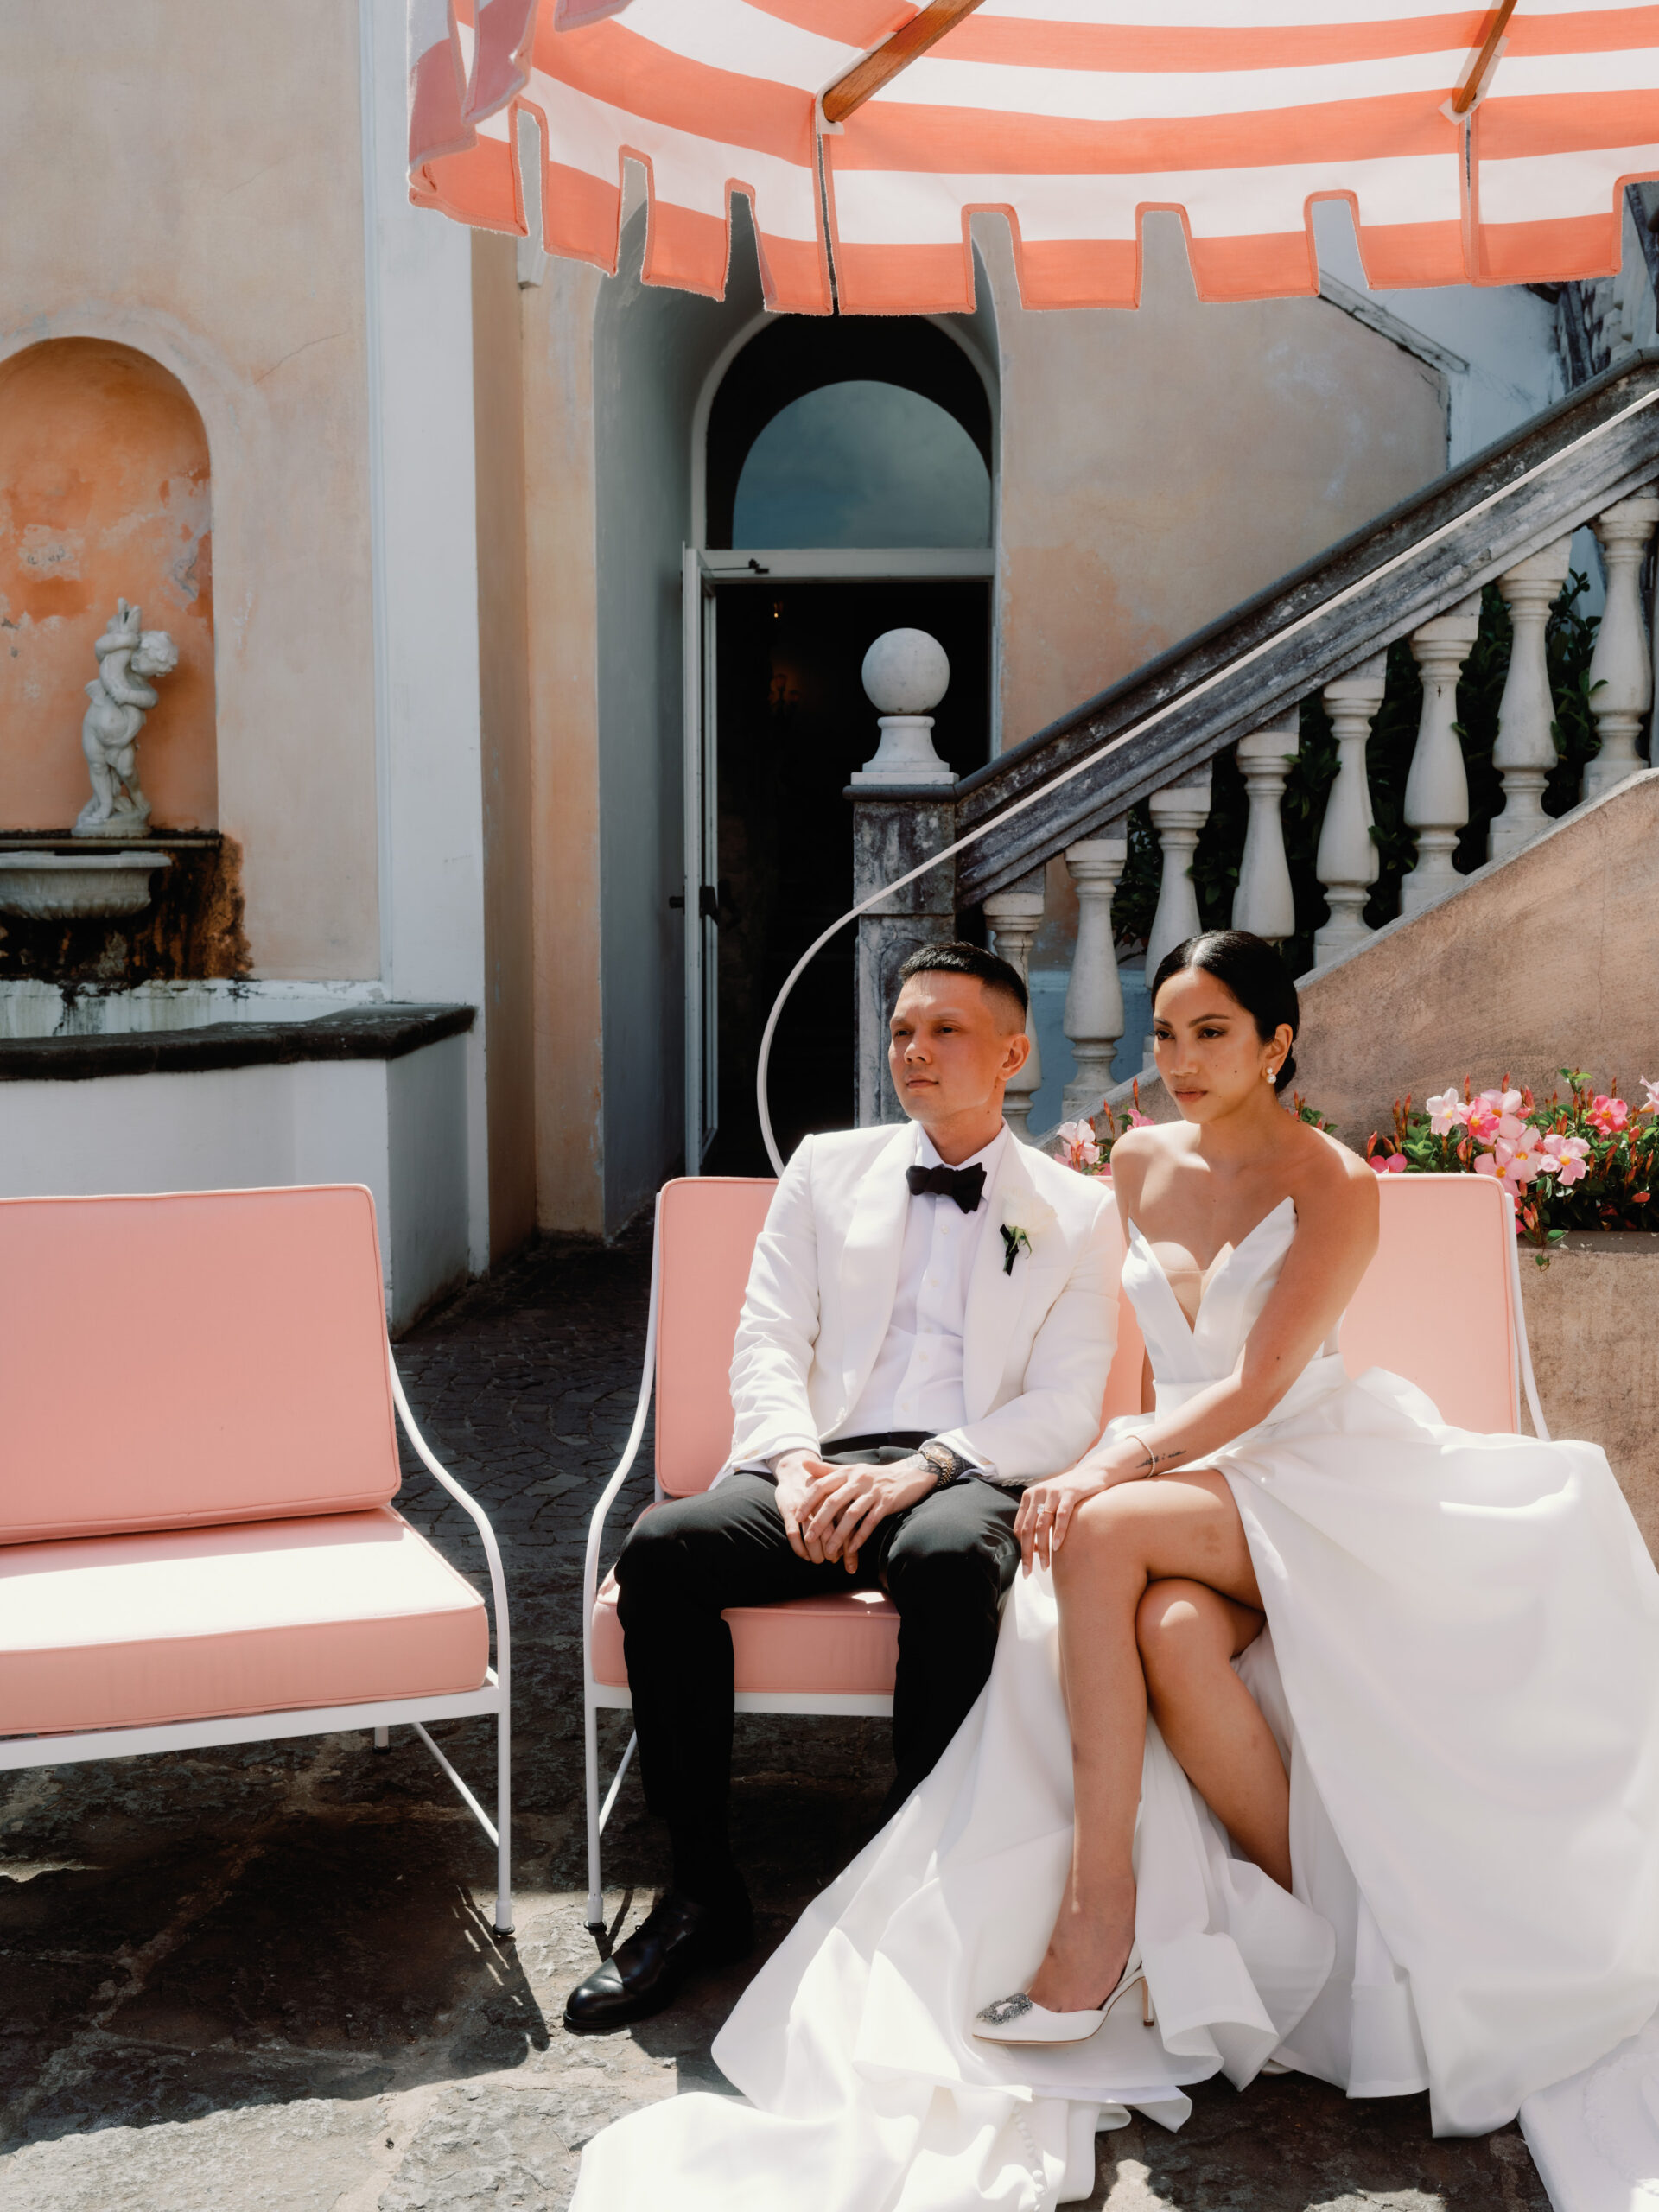 Editorial image of the newlyweds in Ravello, Italy. Image by Jenny Fu Studio